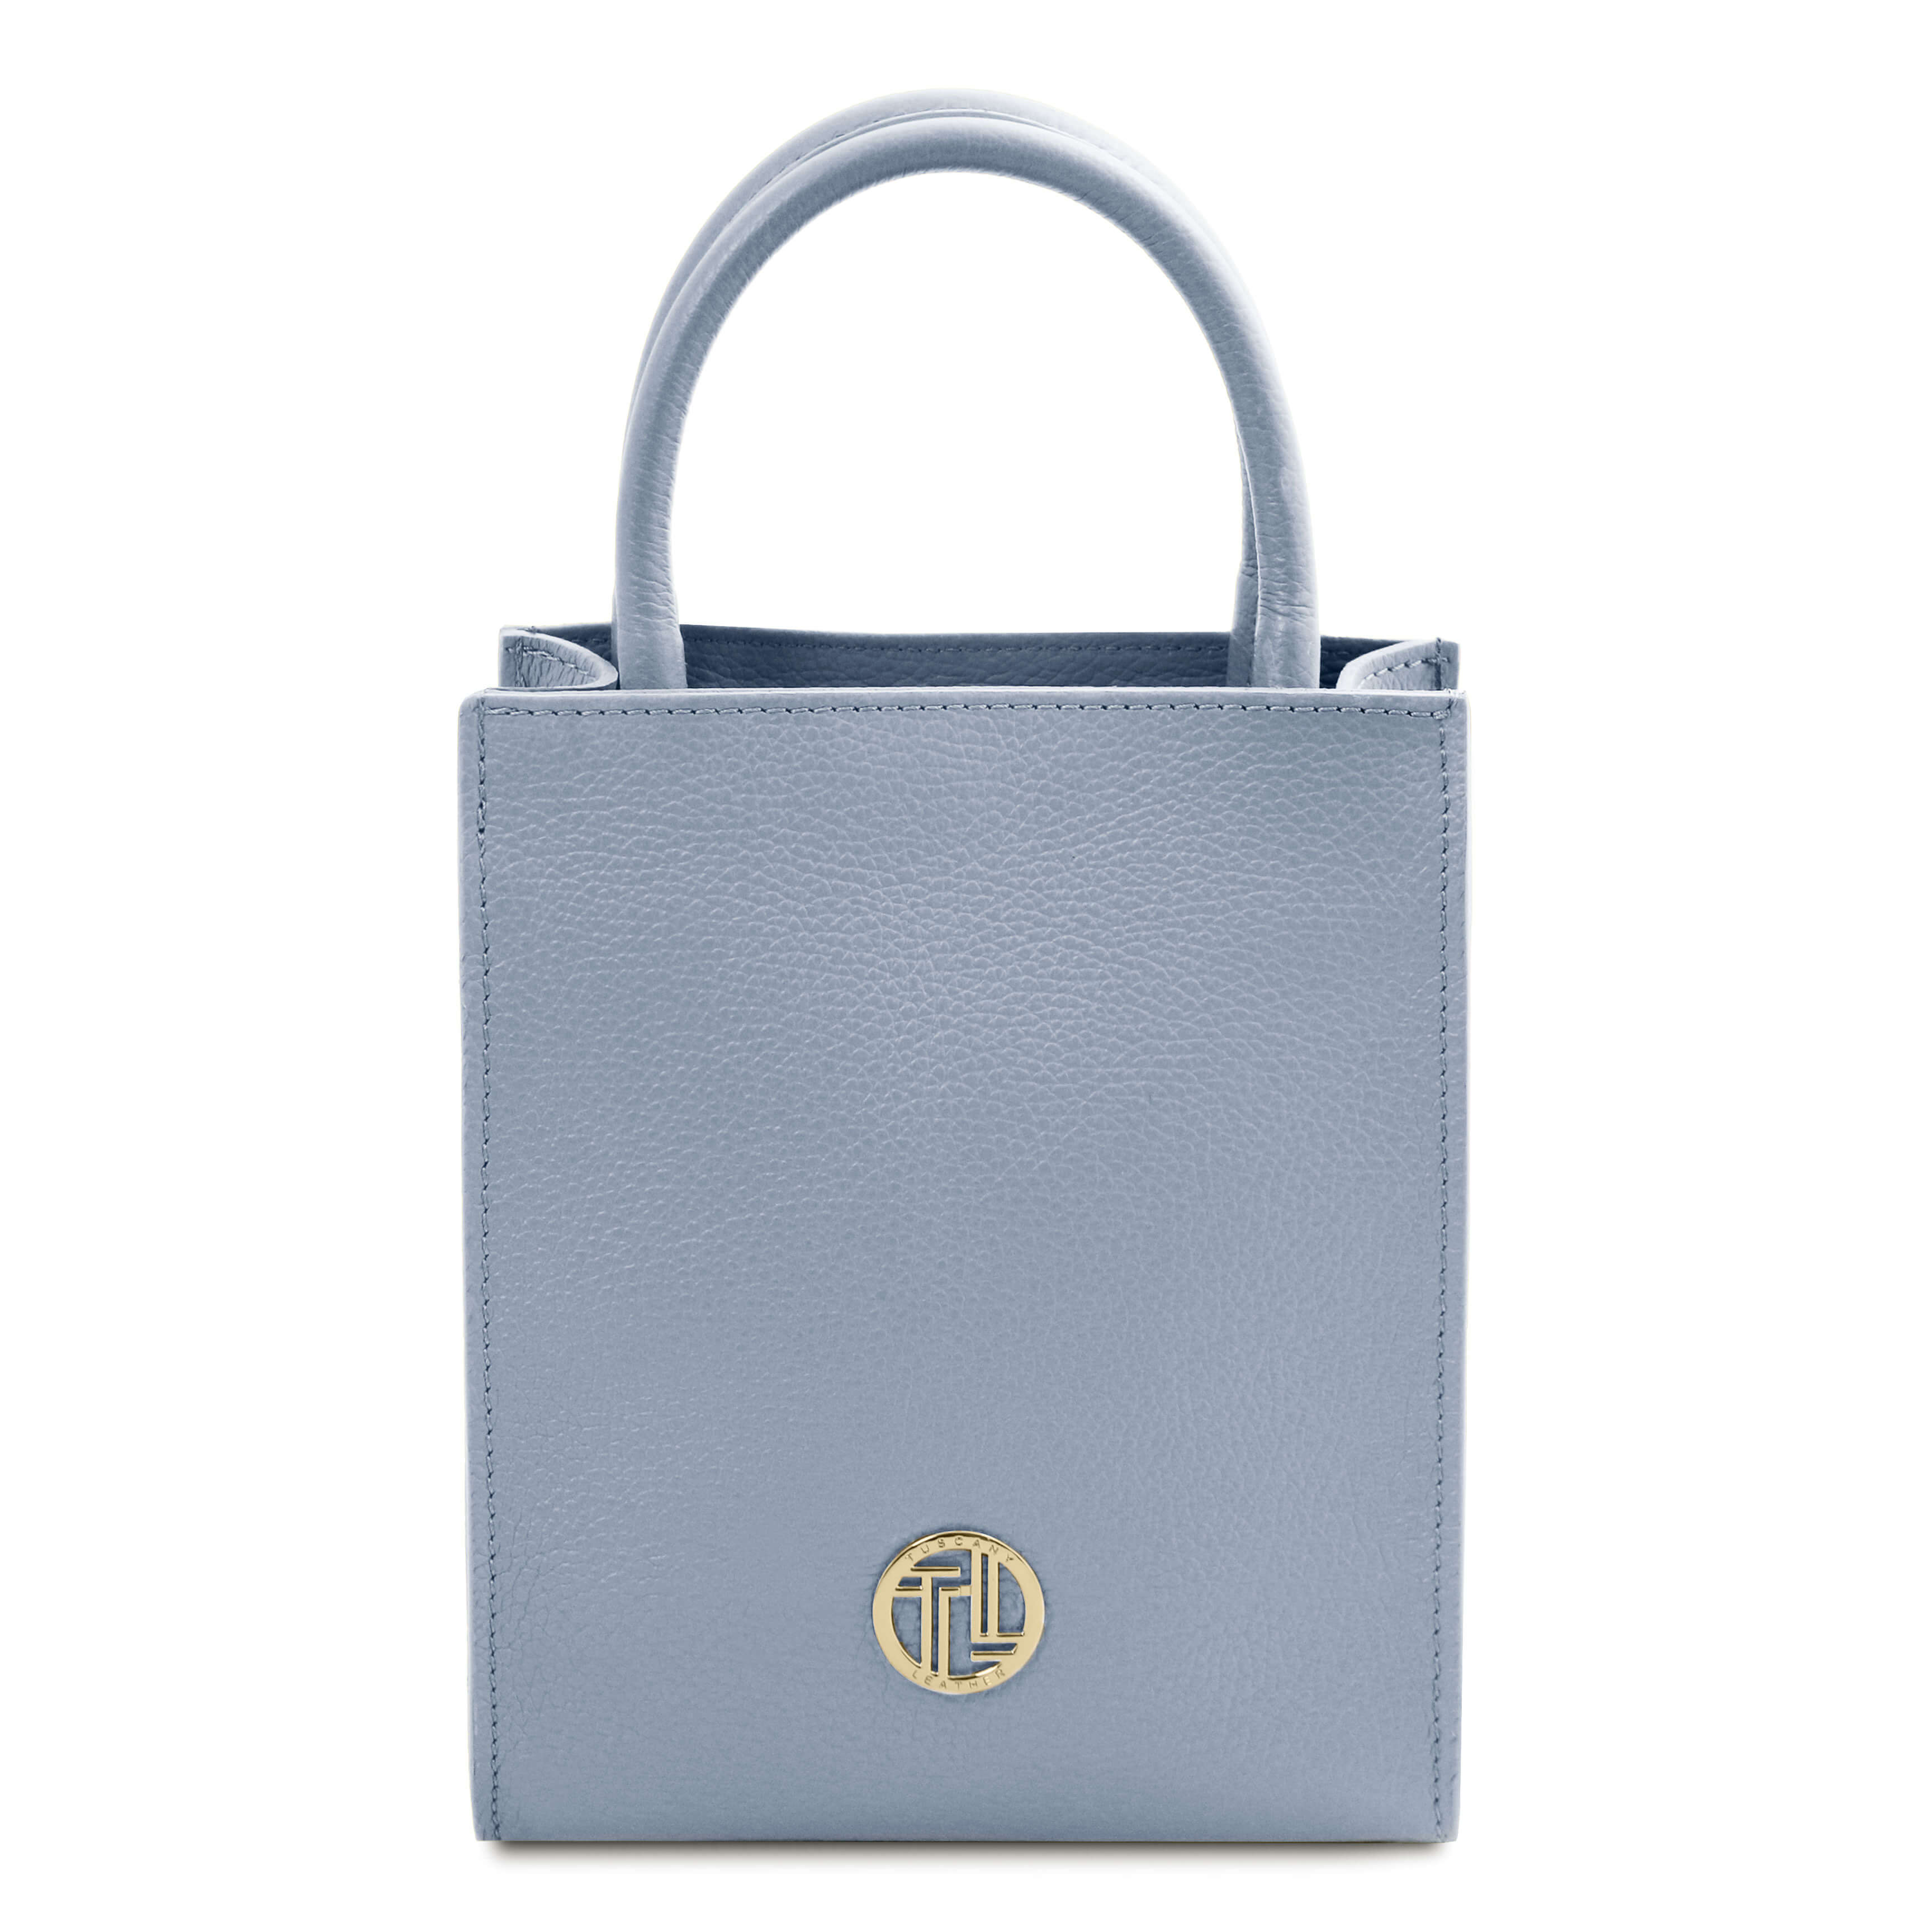 Tuscany Leather handtas KATE voor dames TL142366 blauw